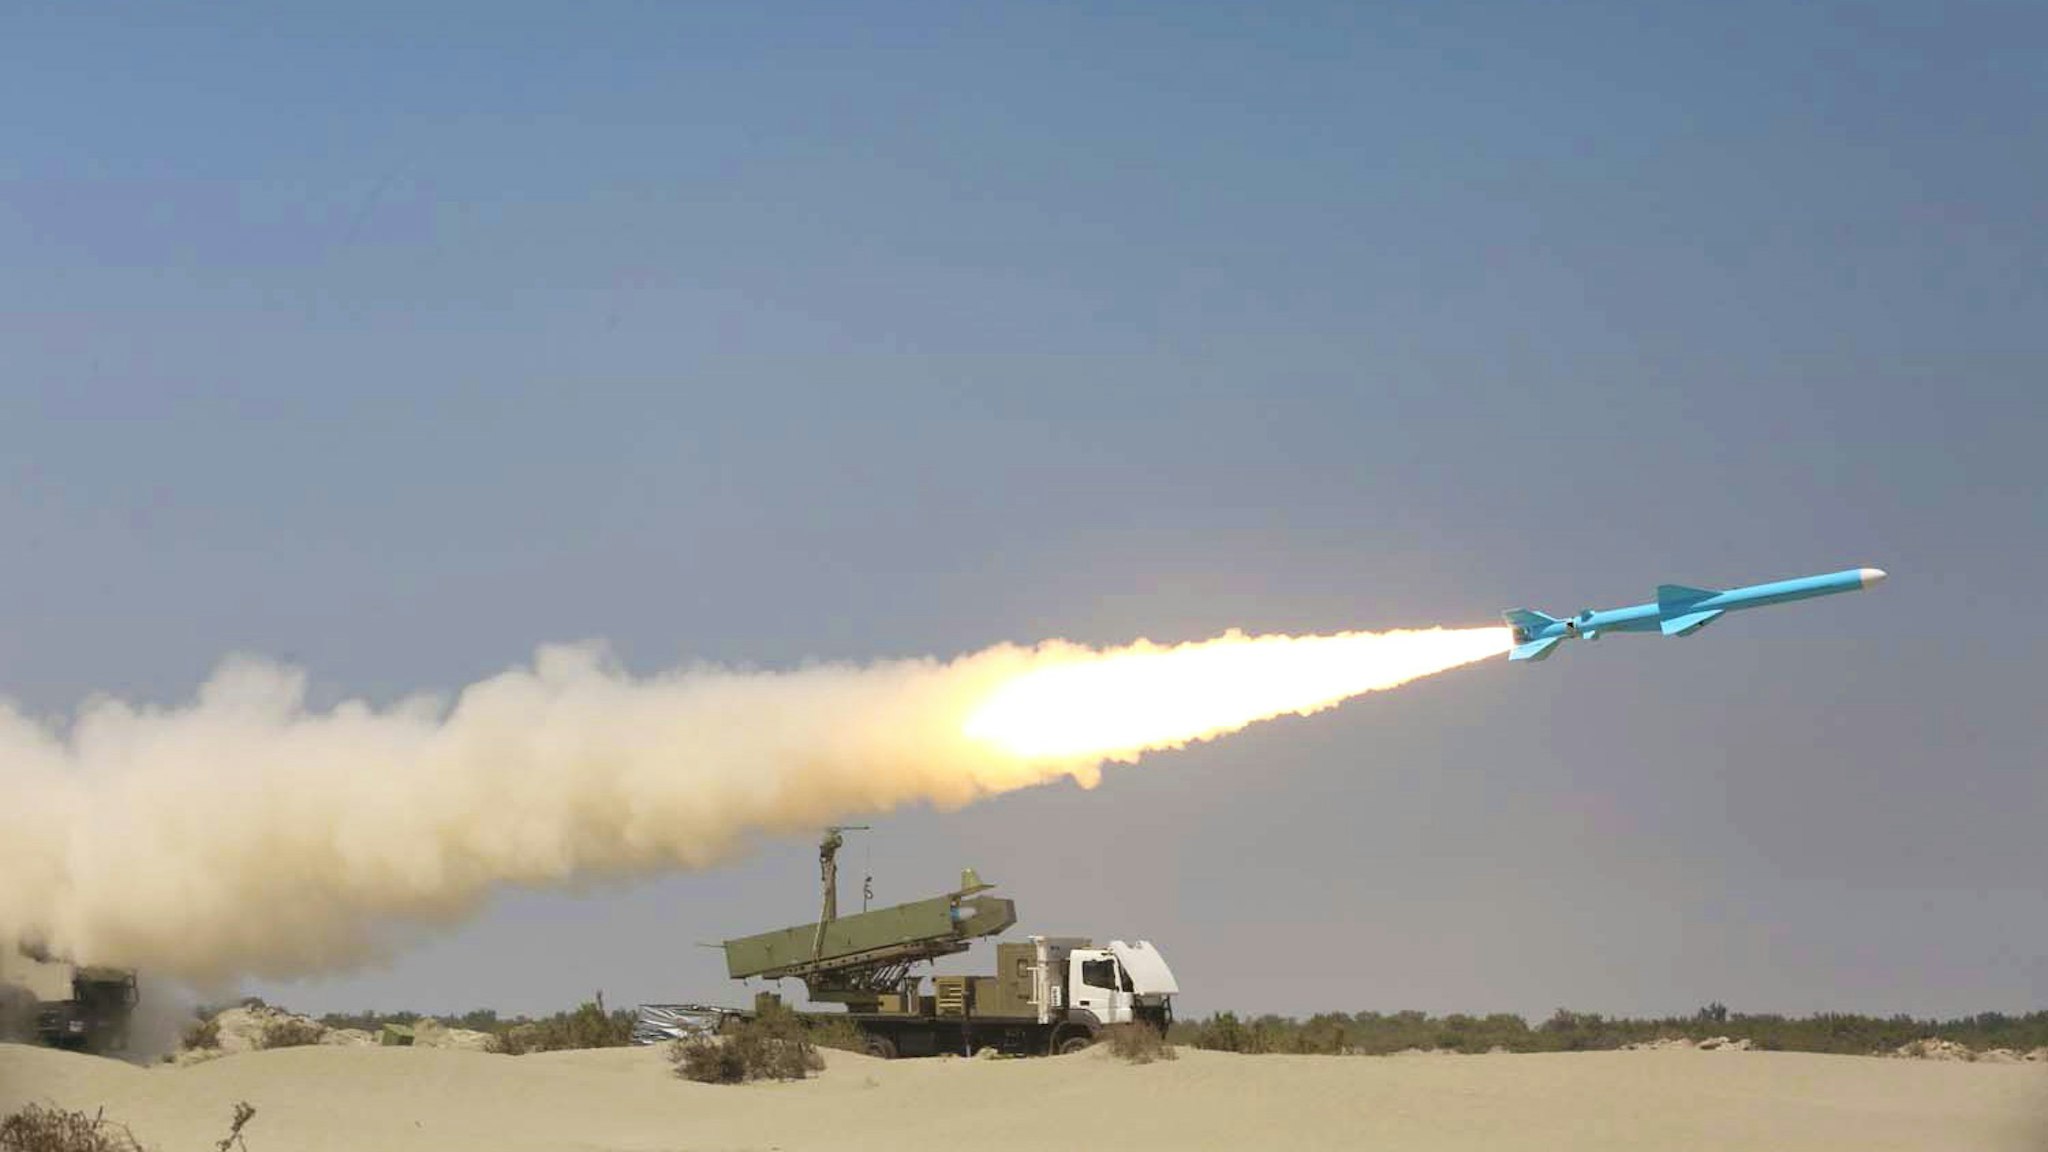 A handout picture provided by the Iranian Army's official website on September 11, 2020, shows an Iranian Ghader missile being fired during the second day of a military exercise in the Gulf, near the strategic strait of Hormuz in southern Iran. - The Iranian navy began on September 10 a three-day exercise in the Sea of Oman near the strategic Strait of Hormuz, deploying an array of warships, drones and missiles. One of the exercise's objectives is to devise "tactical offensive and defensive strategies for safeguarding the country's territorial waters and shipping lanes," the military said on its website.